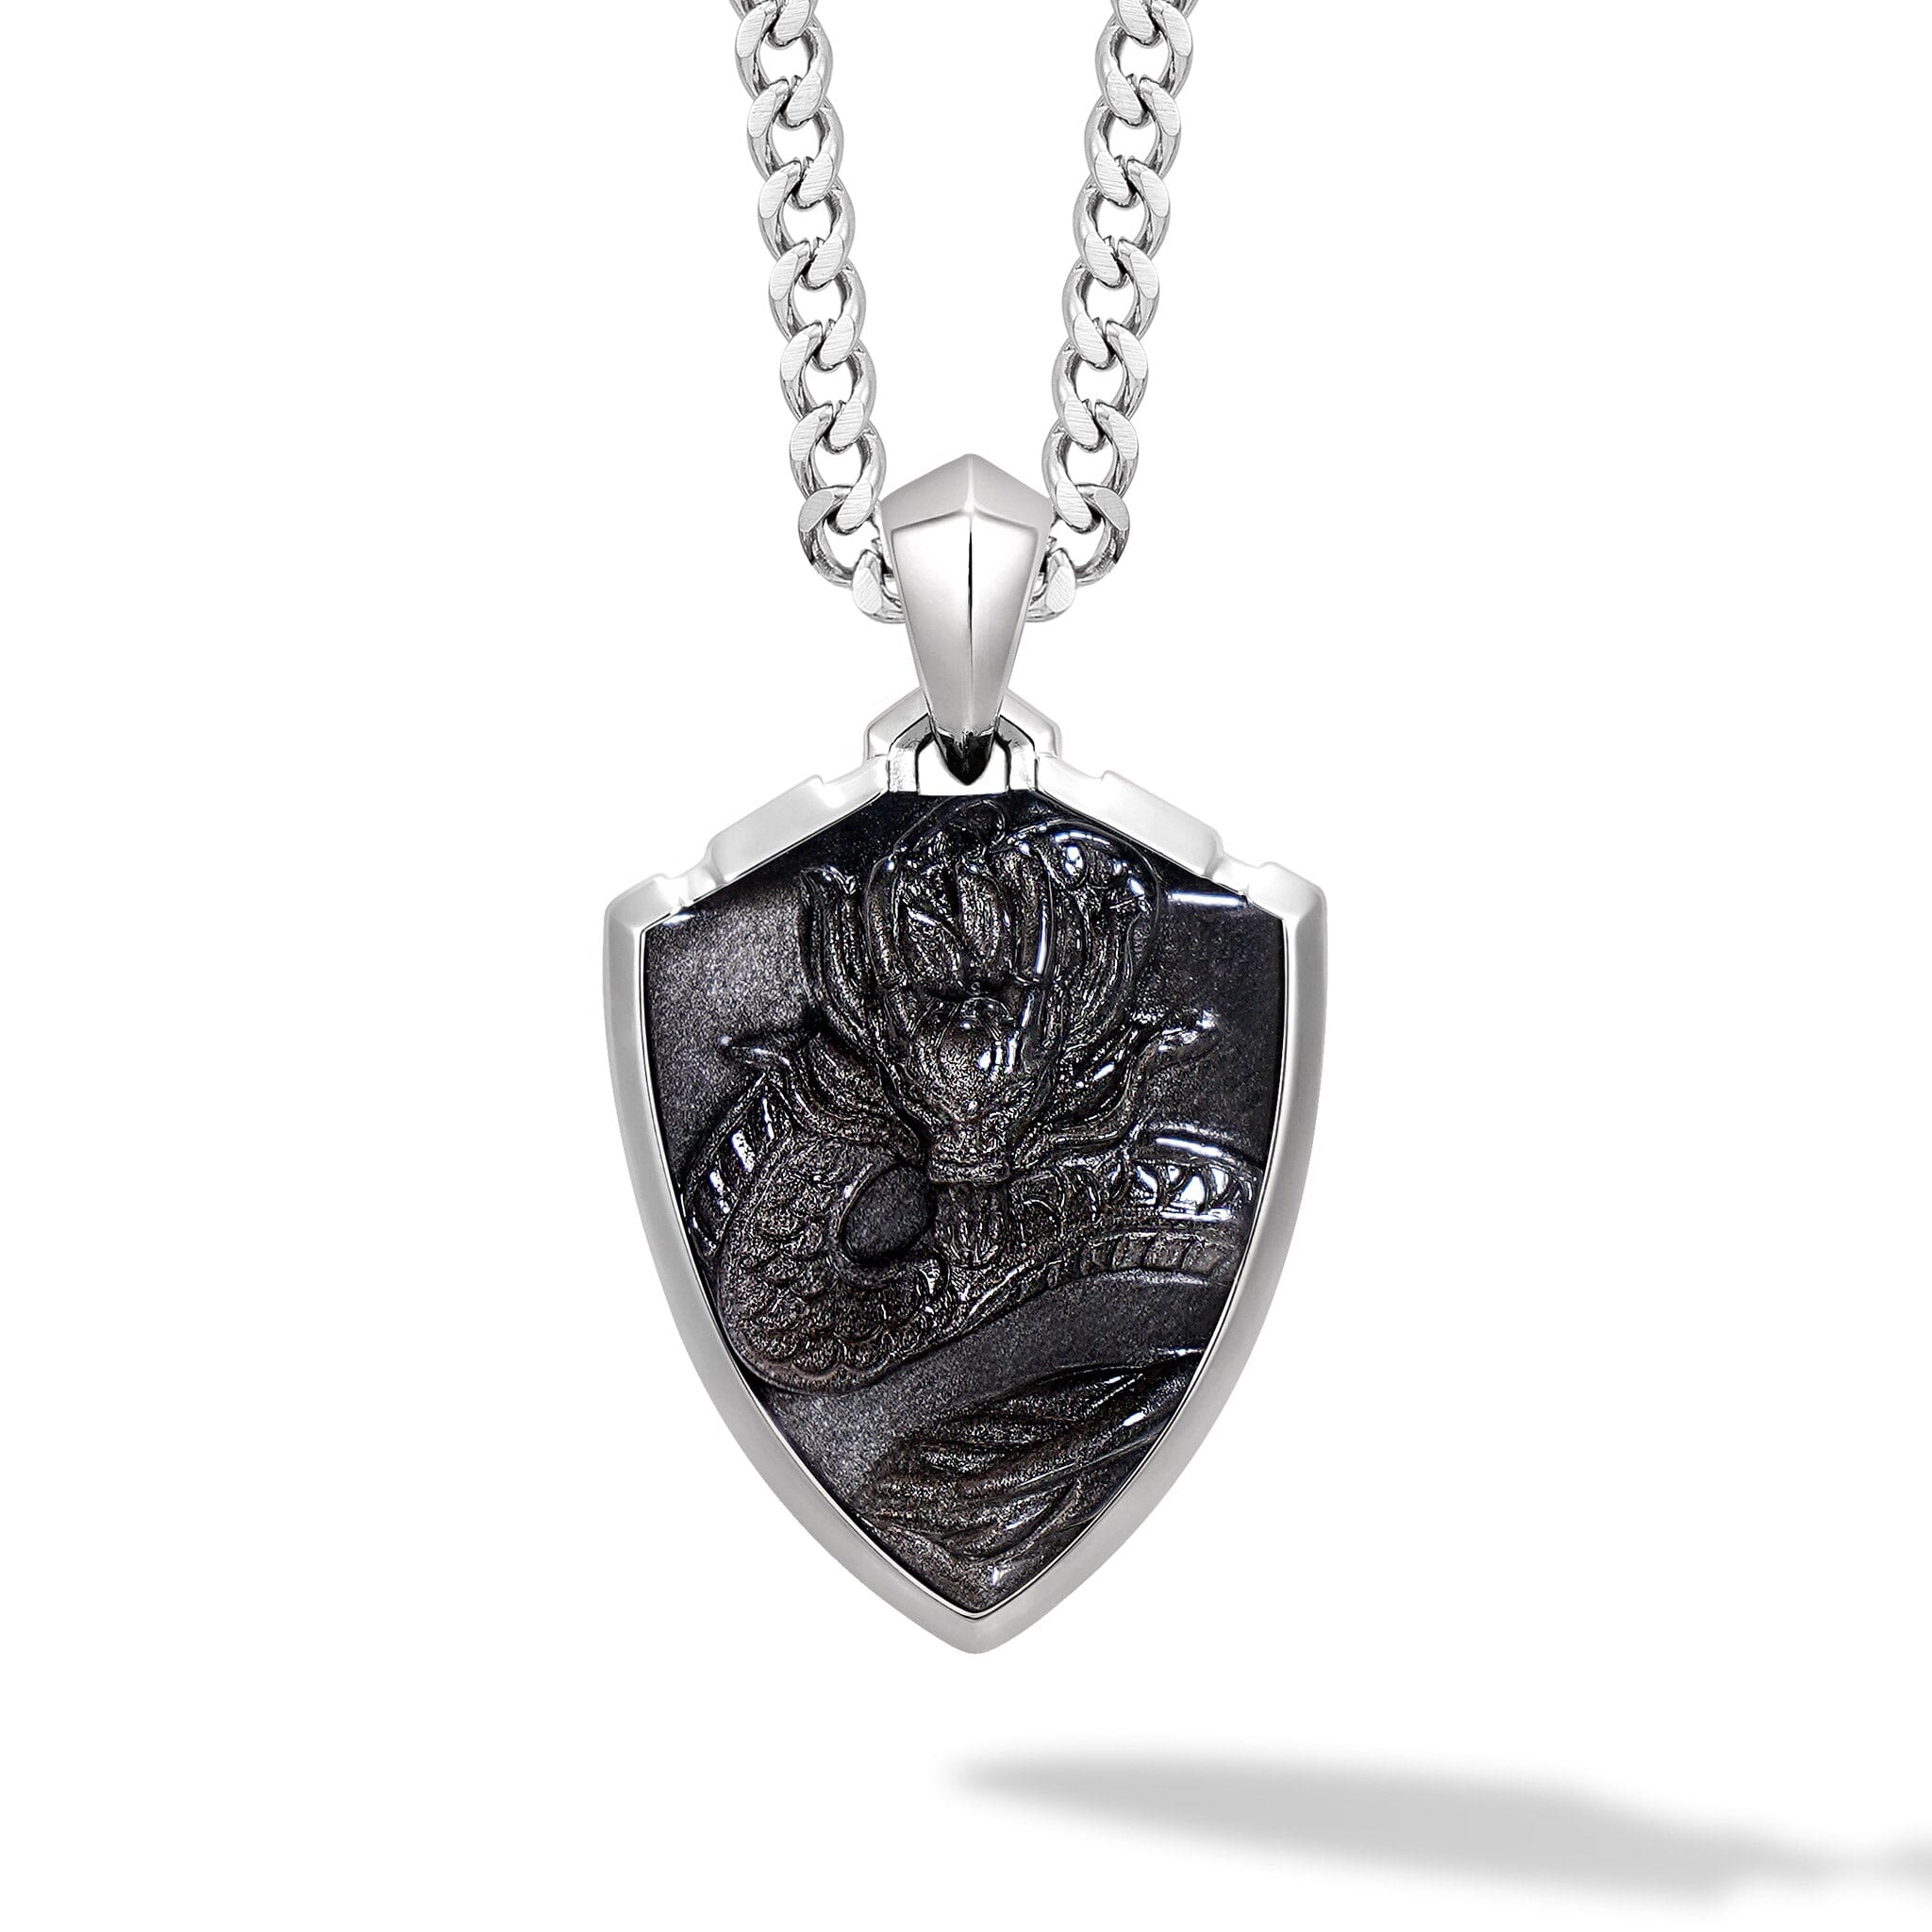 AWNL Men's Dog Tag Pendant Necklace with Meteorite Sterling Silver Chain  Gift for Men